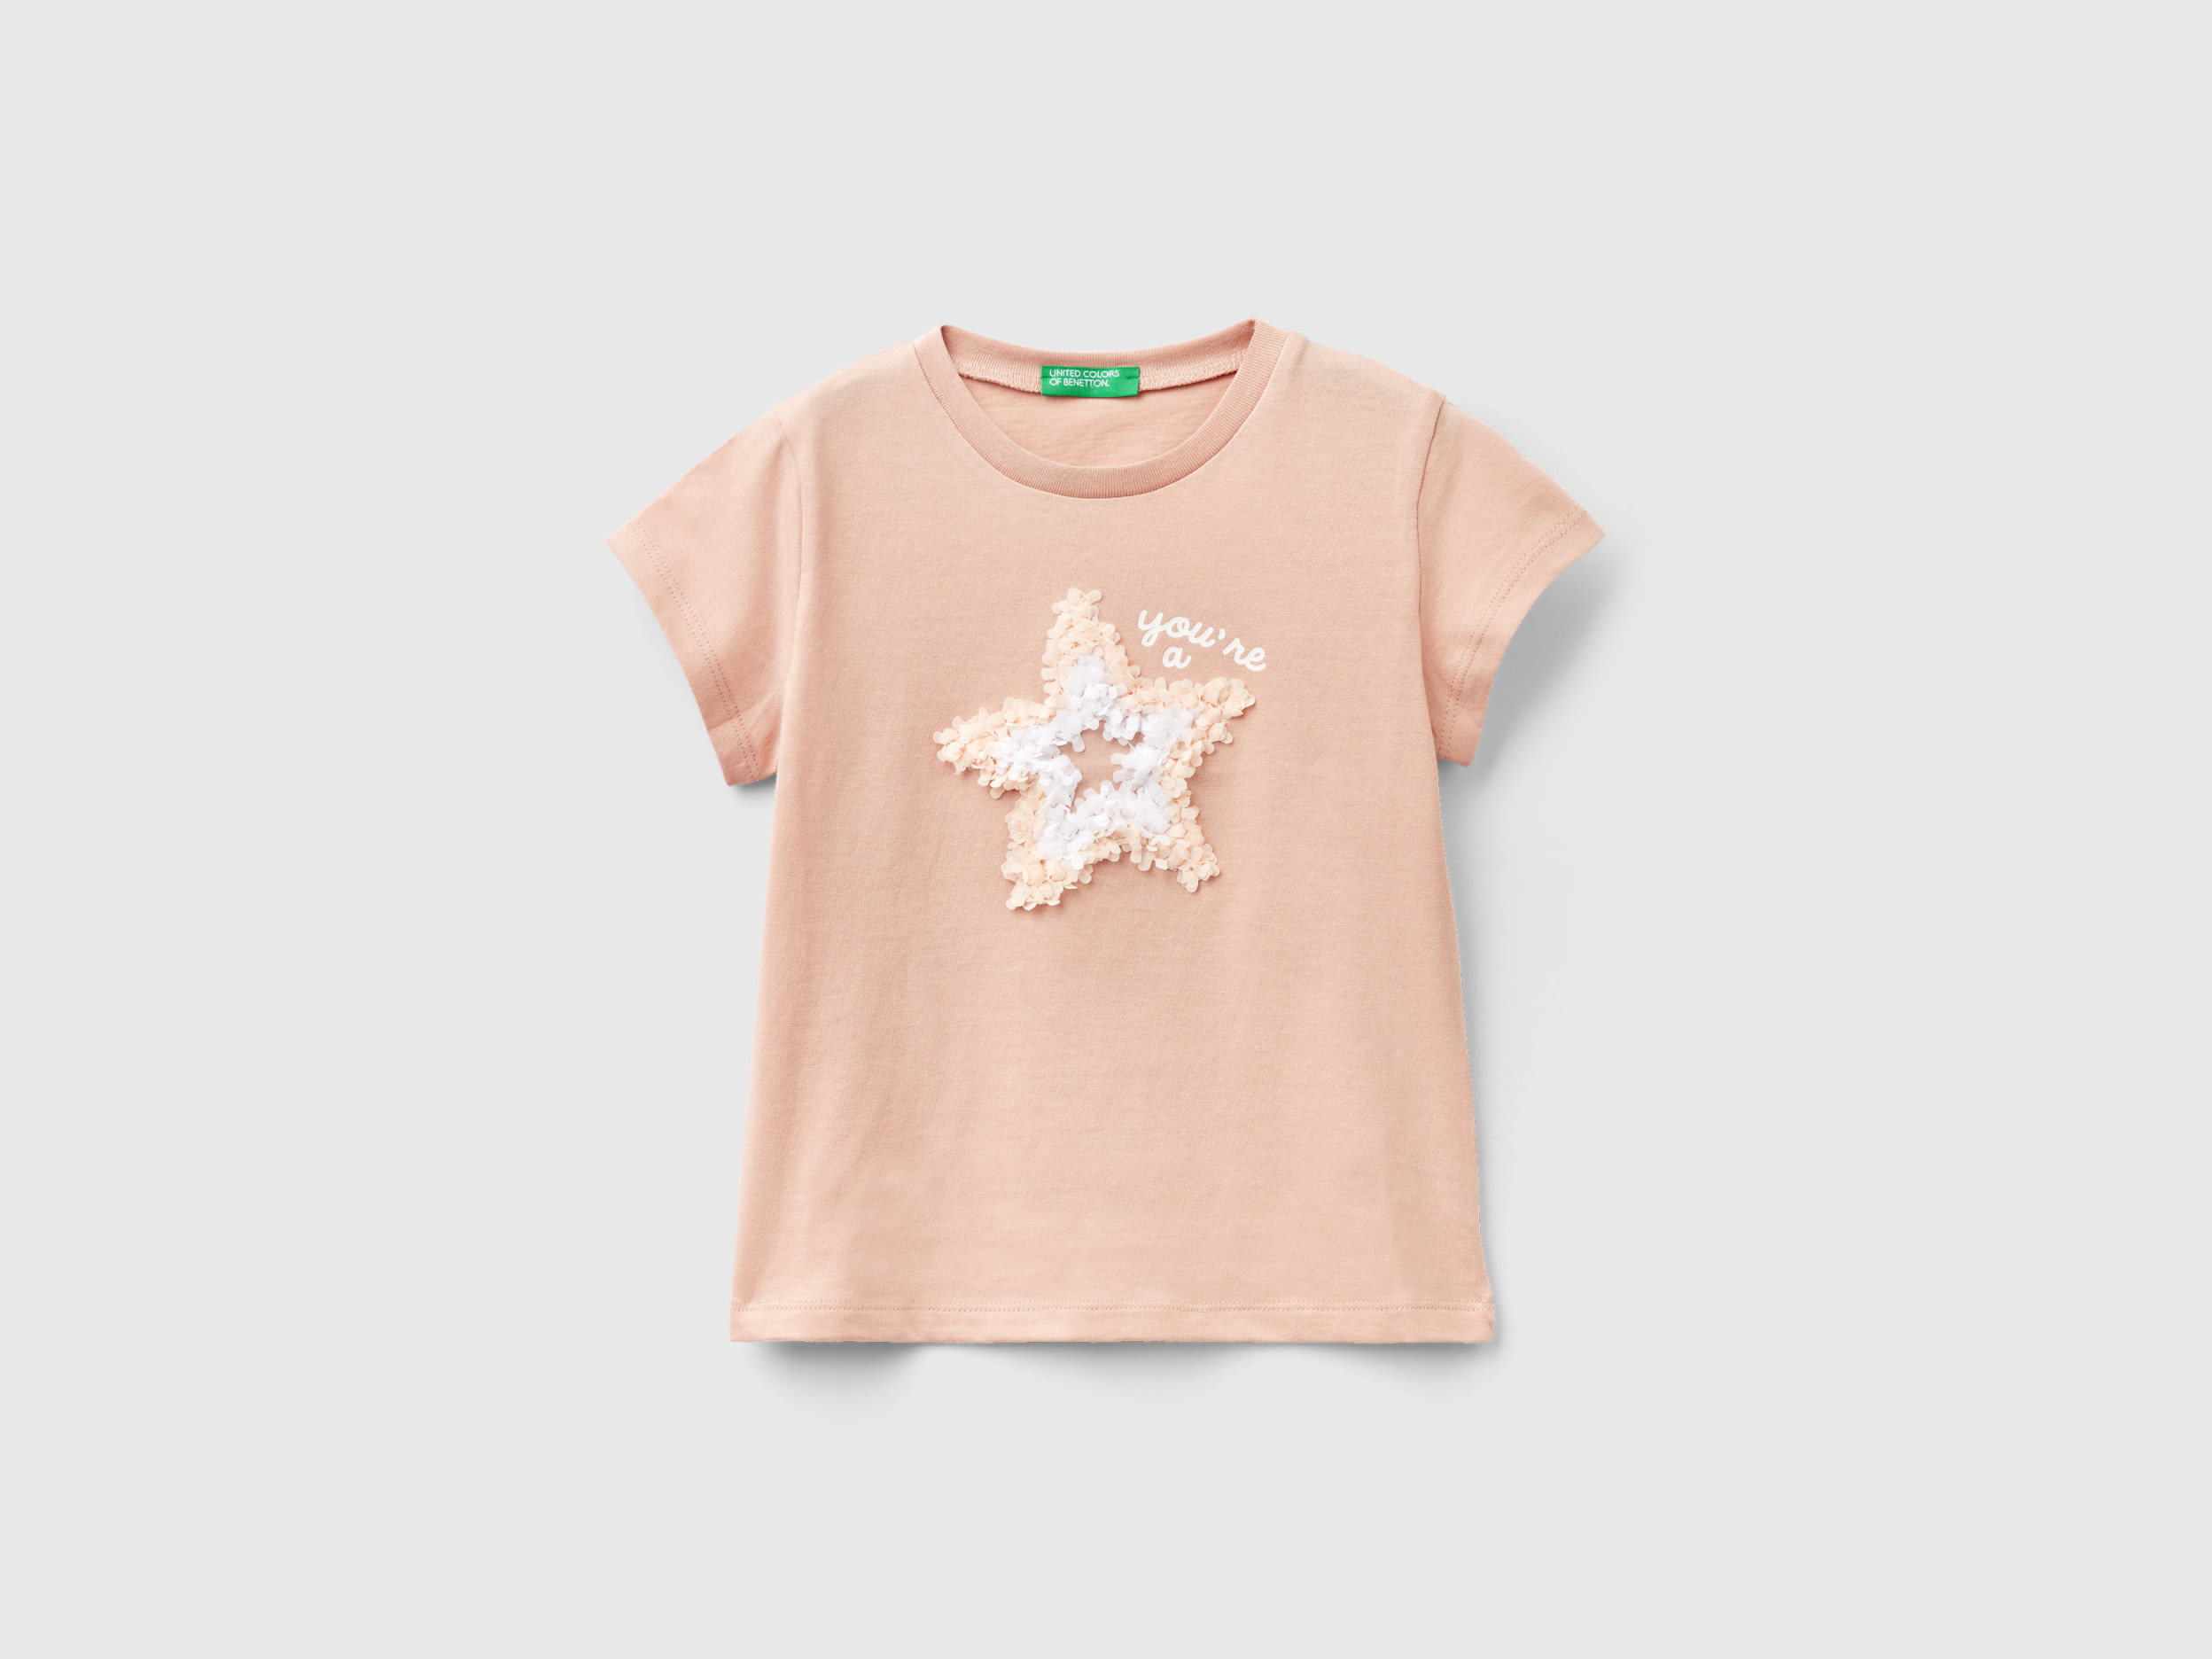 Image of Benetton, T-shirt With Petal Effect Applique, size 116, Nude, Kids